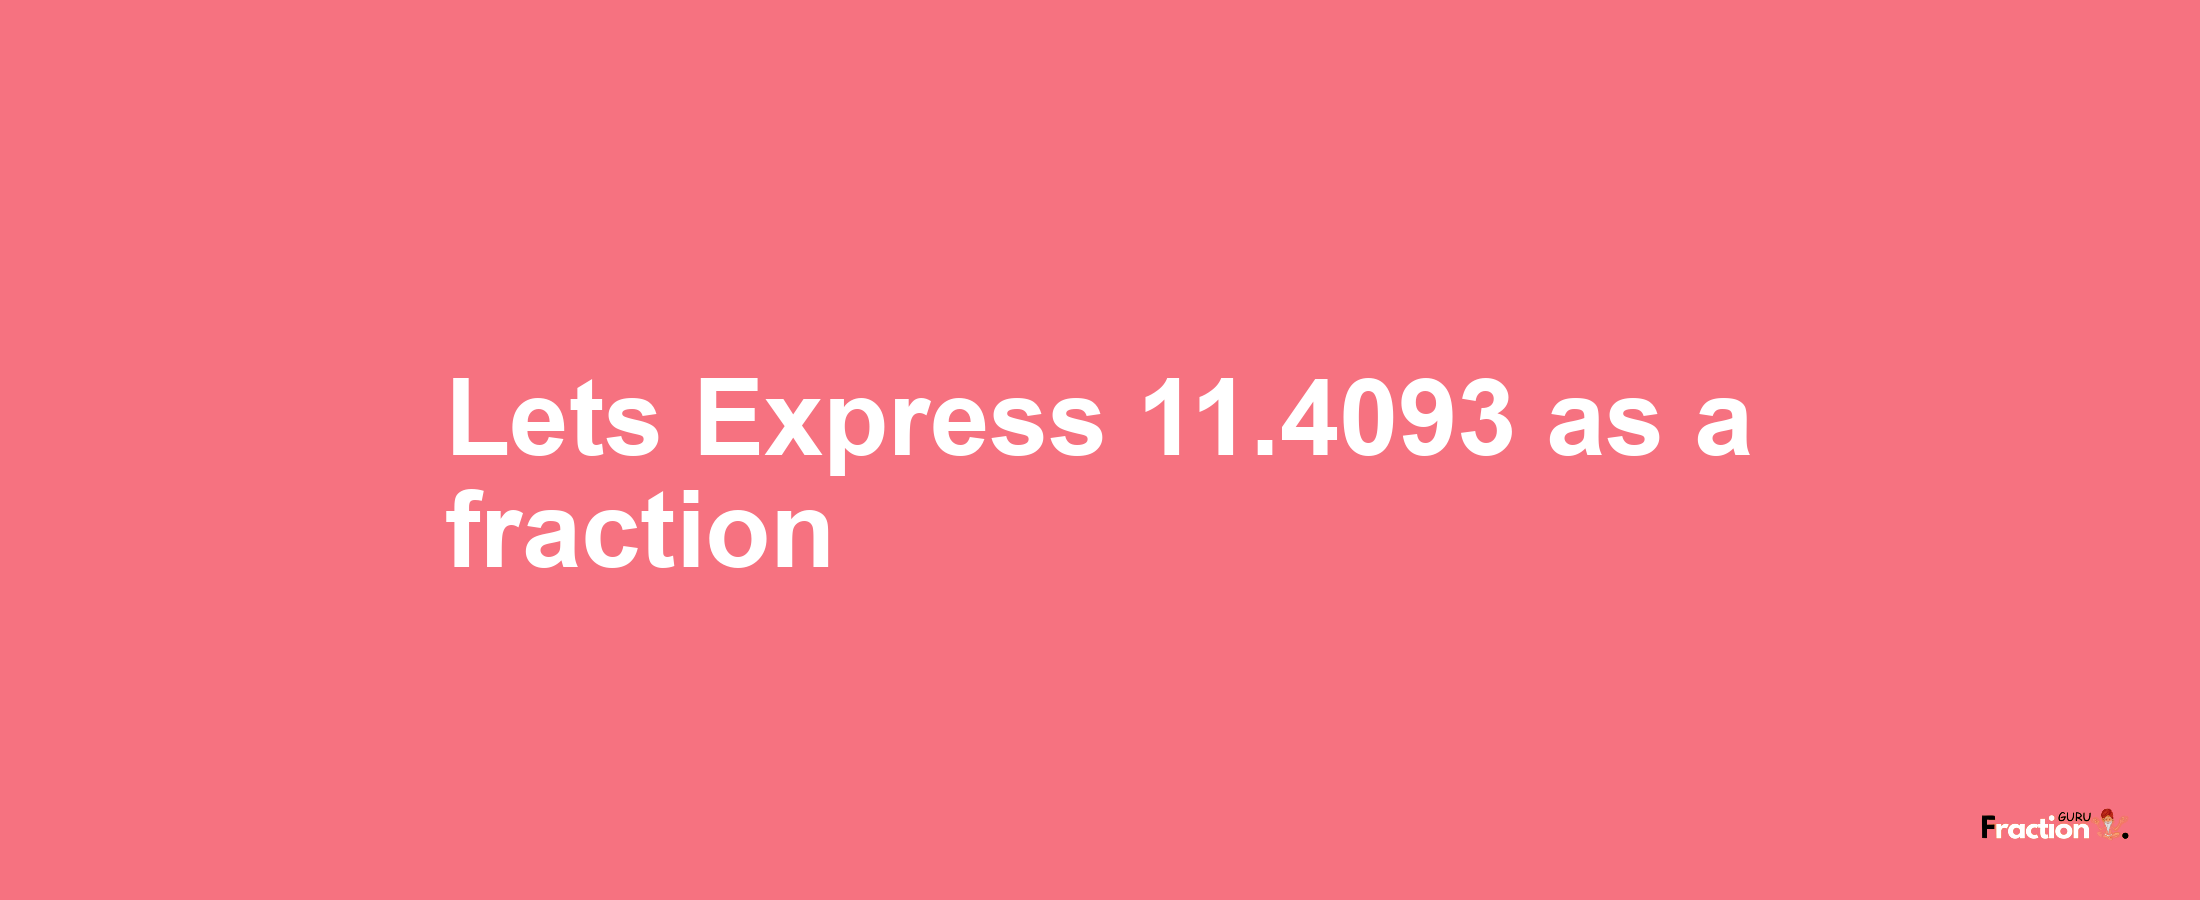 Lets Express 11.4093 as afraction